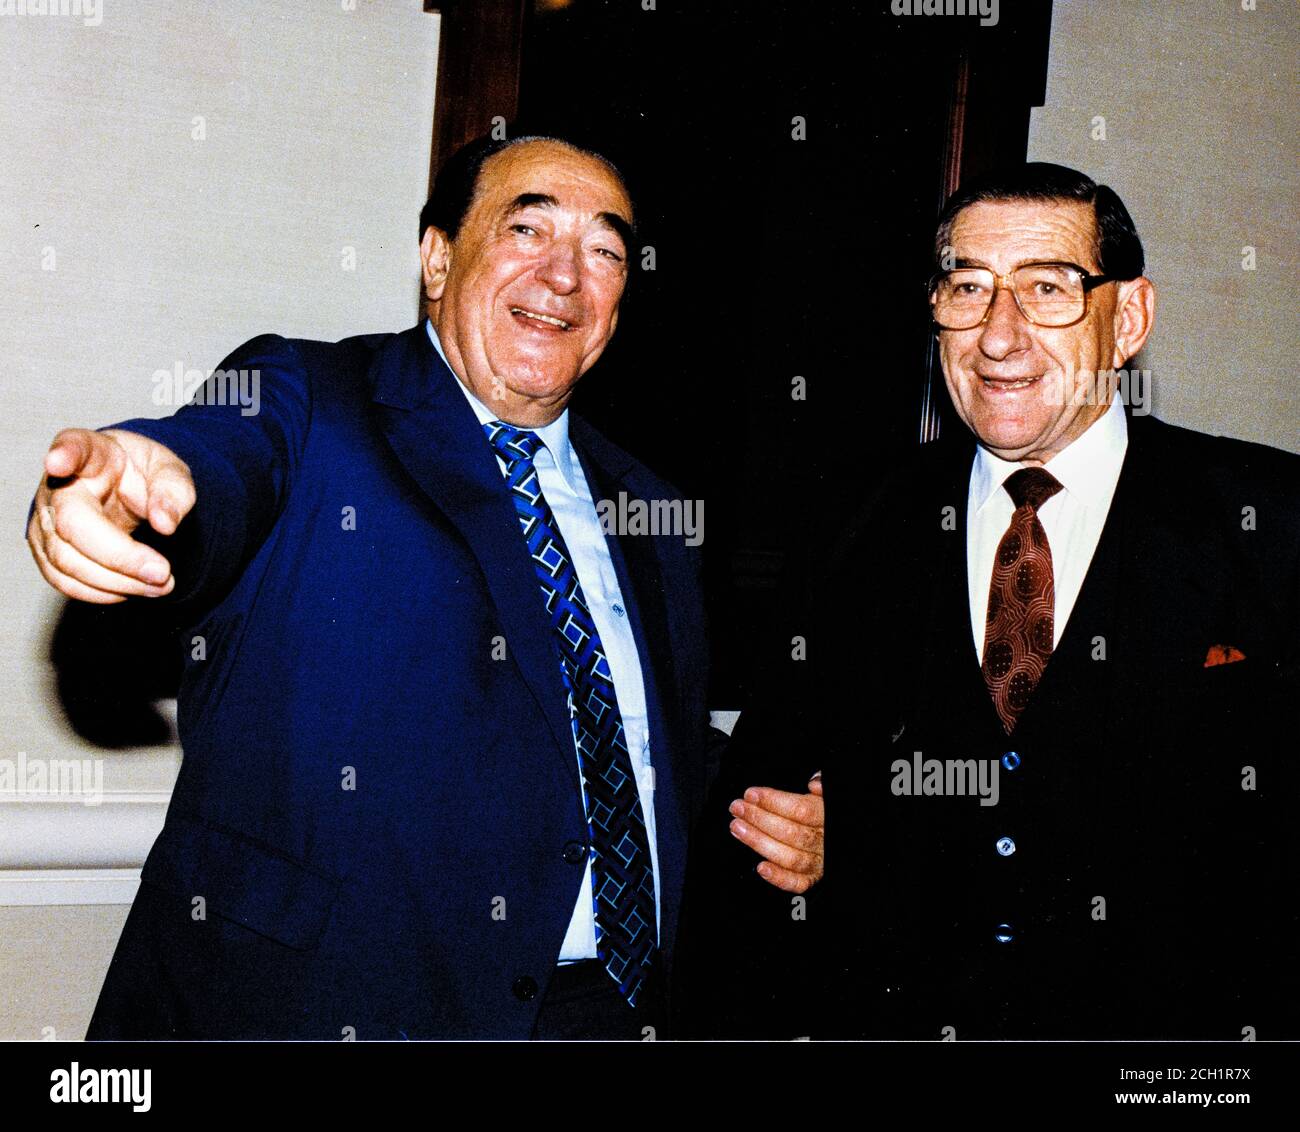 In this file photo from September 25, 1990, disgraced publisher Robert Maxwell, left, meets South African Ambassador to the United States Piet G.J. Koornhof in Washington, DC on September 25, 1990. The New York Post is reporting today that Maxwell, through his daughter Ghislaine Maxwell, may have been the source the huge fortune amassed by alleged pedophile Jeffrey Epstein, who hanged himself in his Manhattan lockup last August.Credit: Ron Sachs/CNP | usage worldwide Stock Photo